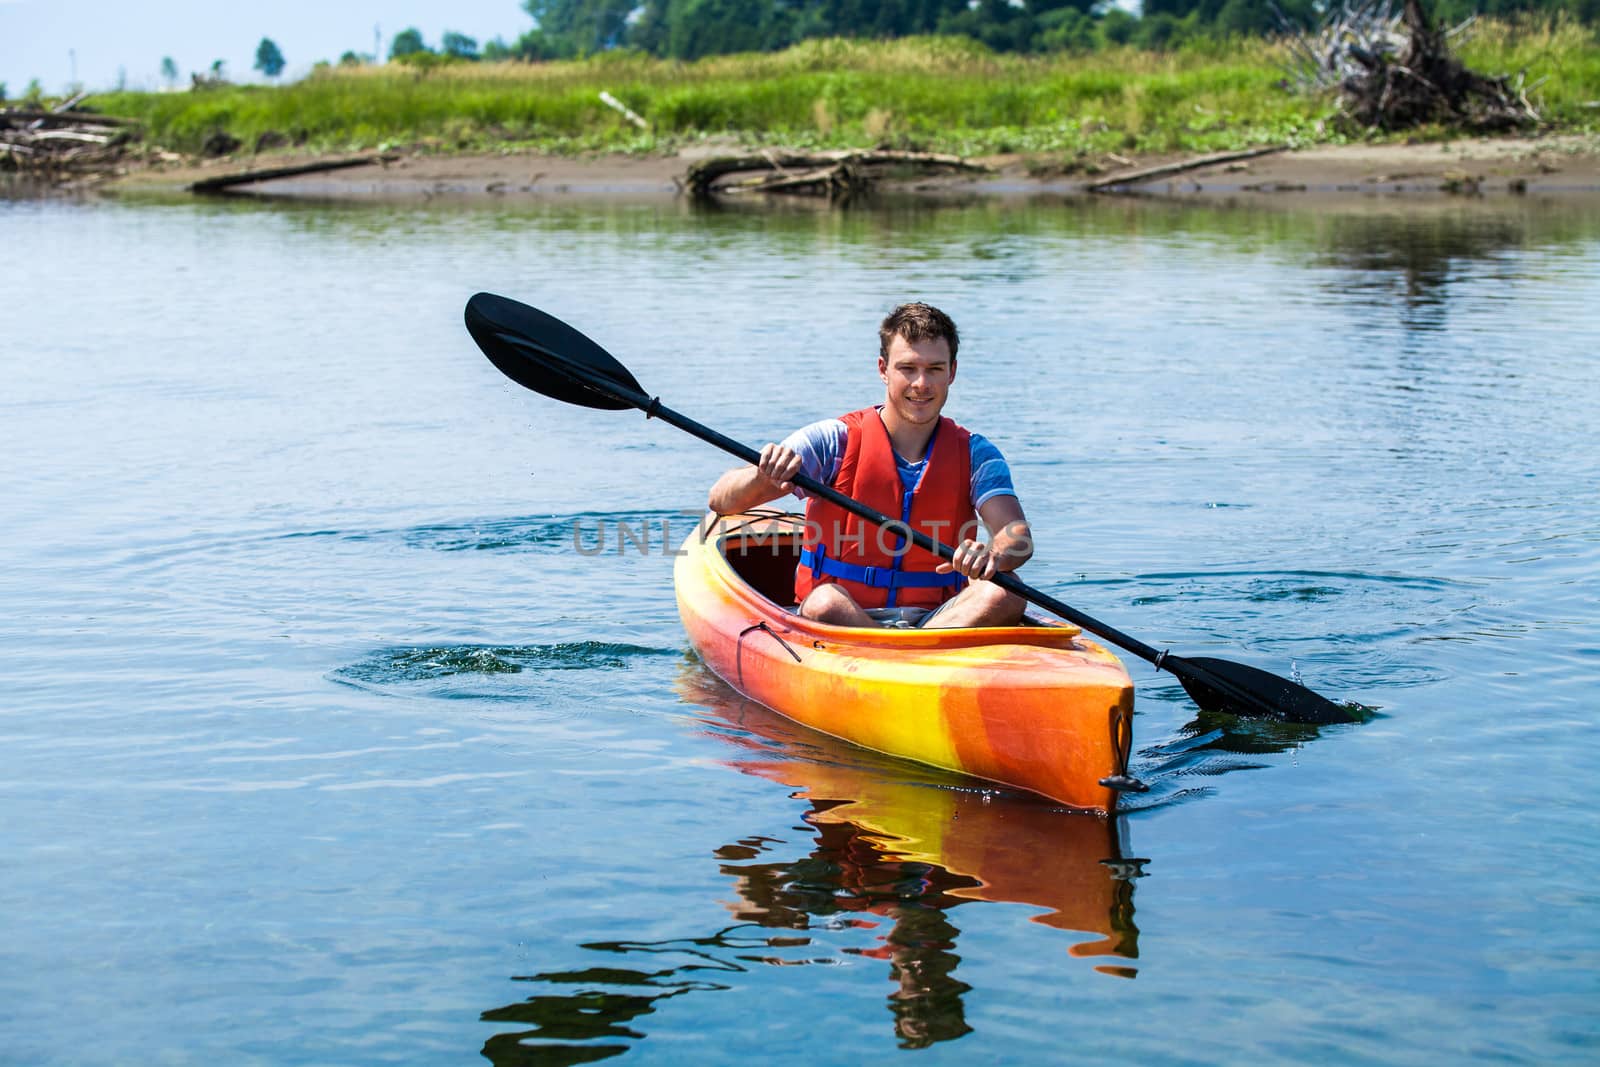 Young Man Kayaking Alone on a Calm River and Wearing a Safety Vest